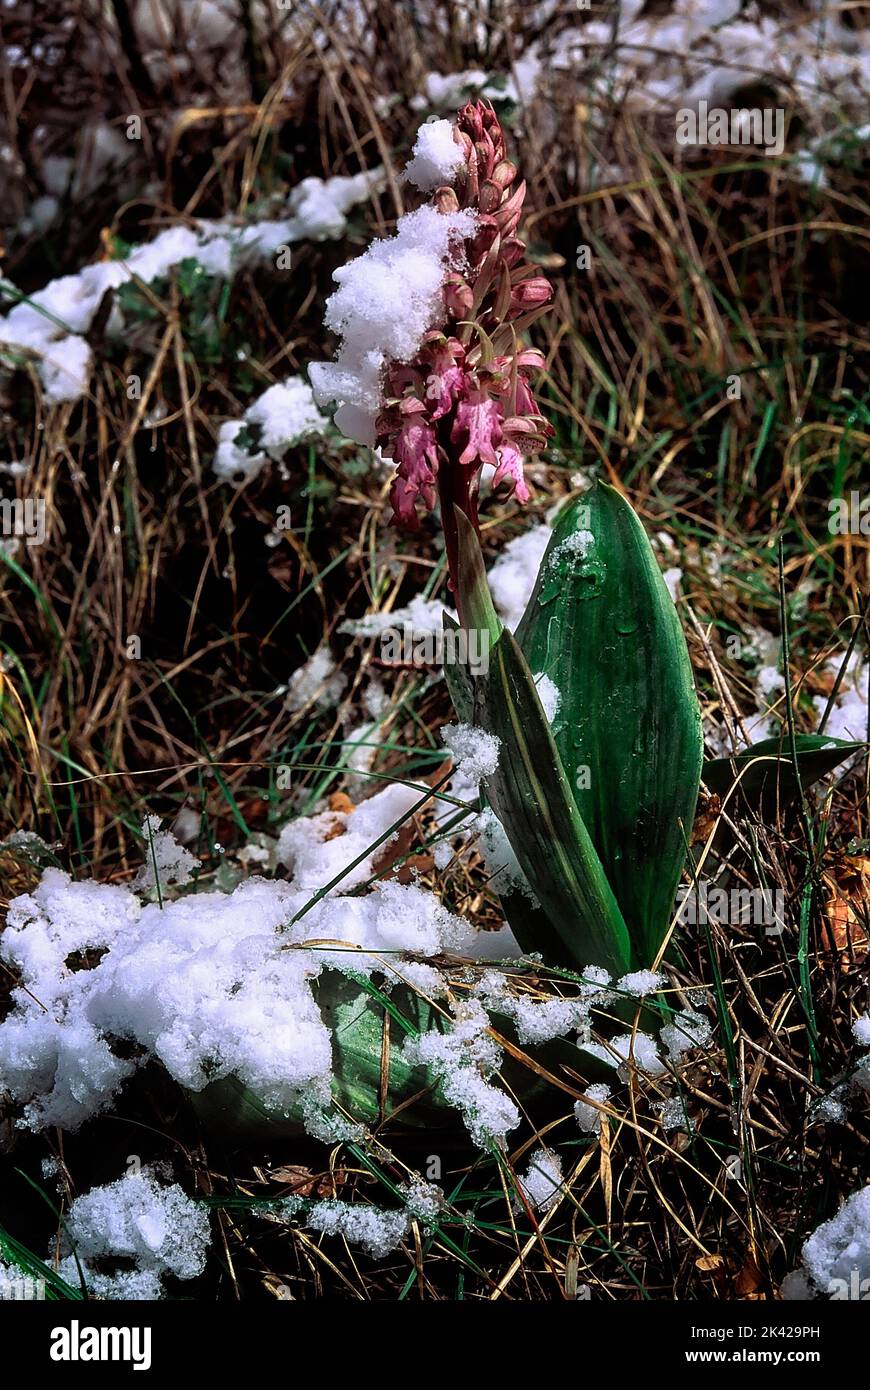 Barlia robertiana (Orchidaceae), spontaneous orchid blooming under the snow. Stock Photo